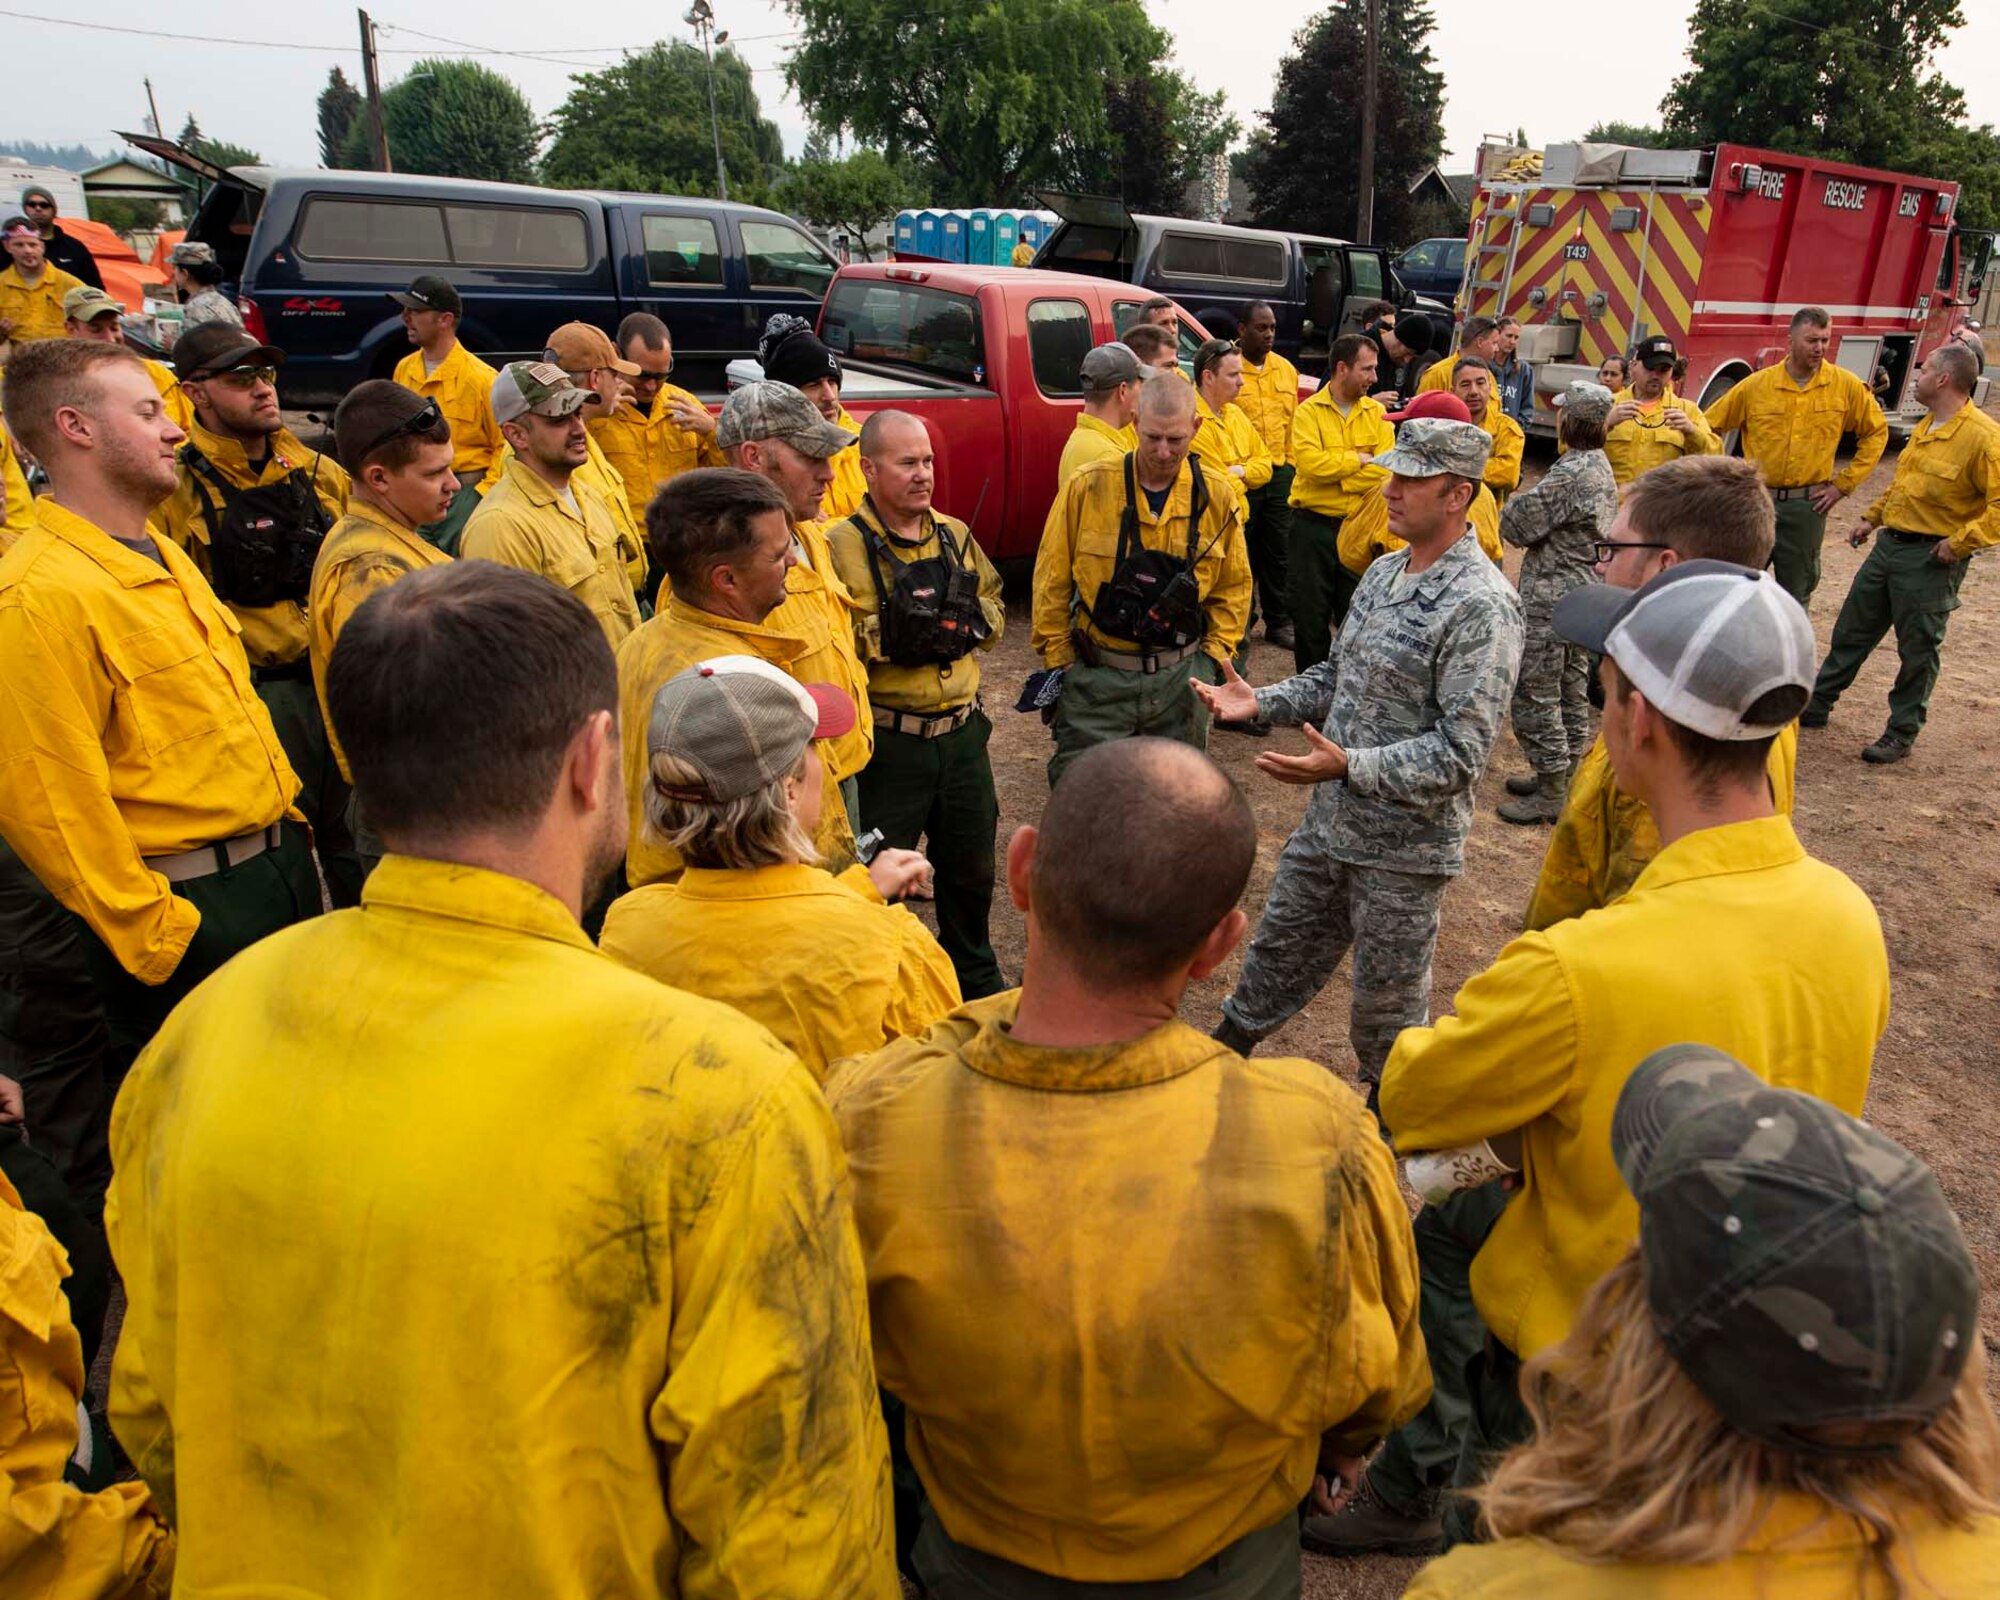 Col. Johan Deutscher, commander of the 141st Air Refueling Wing, greets guardsmen from the 141st who mobilized to Northport, Wash. to support firefighting efforts for the Sheep Creek fire August 8, 2018. Nearly 60 Guardsmen from the 141st ARW were mobilized to help support firefighting efforts throughout the region. (U.S. Air National Guard photo by Staff Sgt. Rose M. Lust)